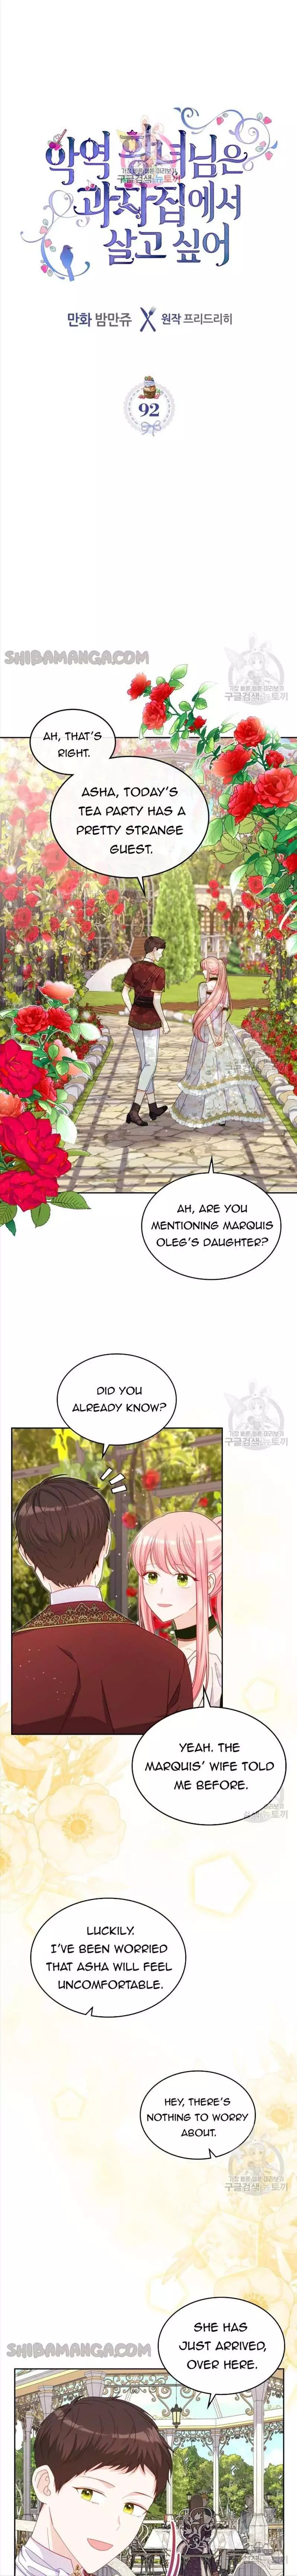 The Villainous Princess Wants To Live In A Gingerbread House - 92 page 2-3dcdd481